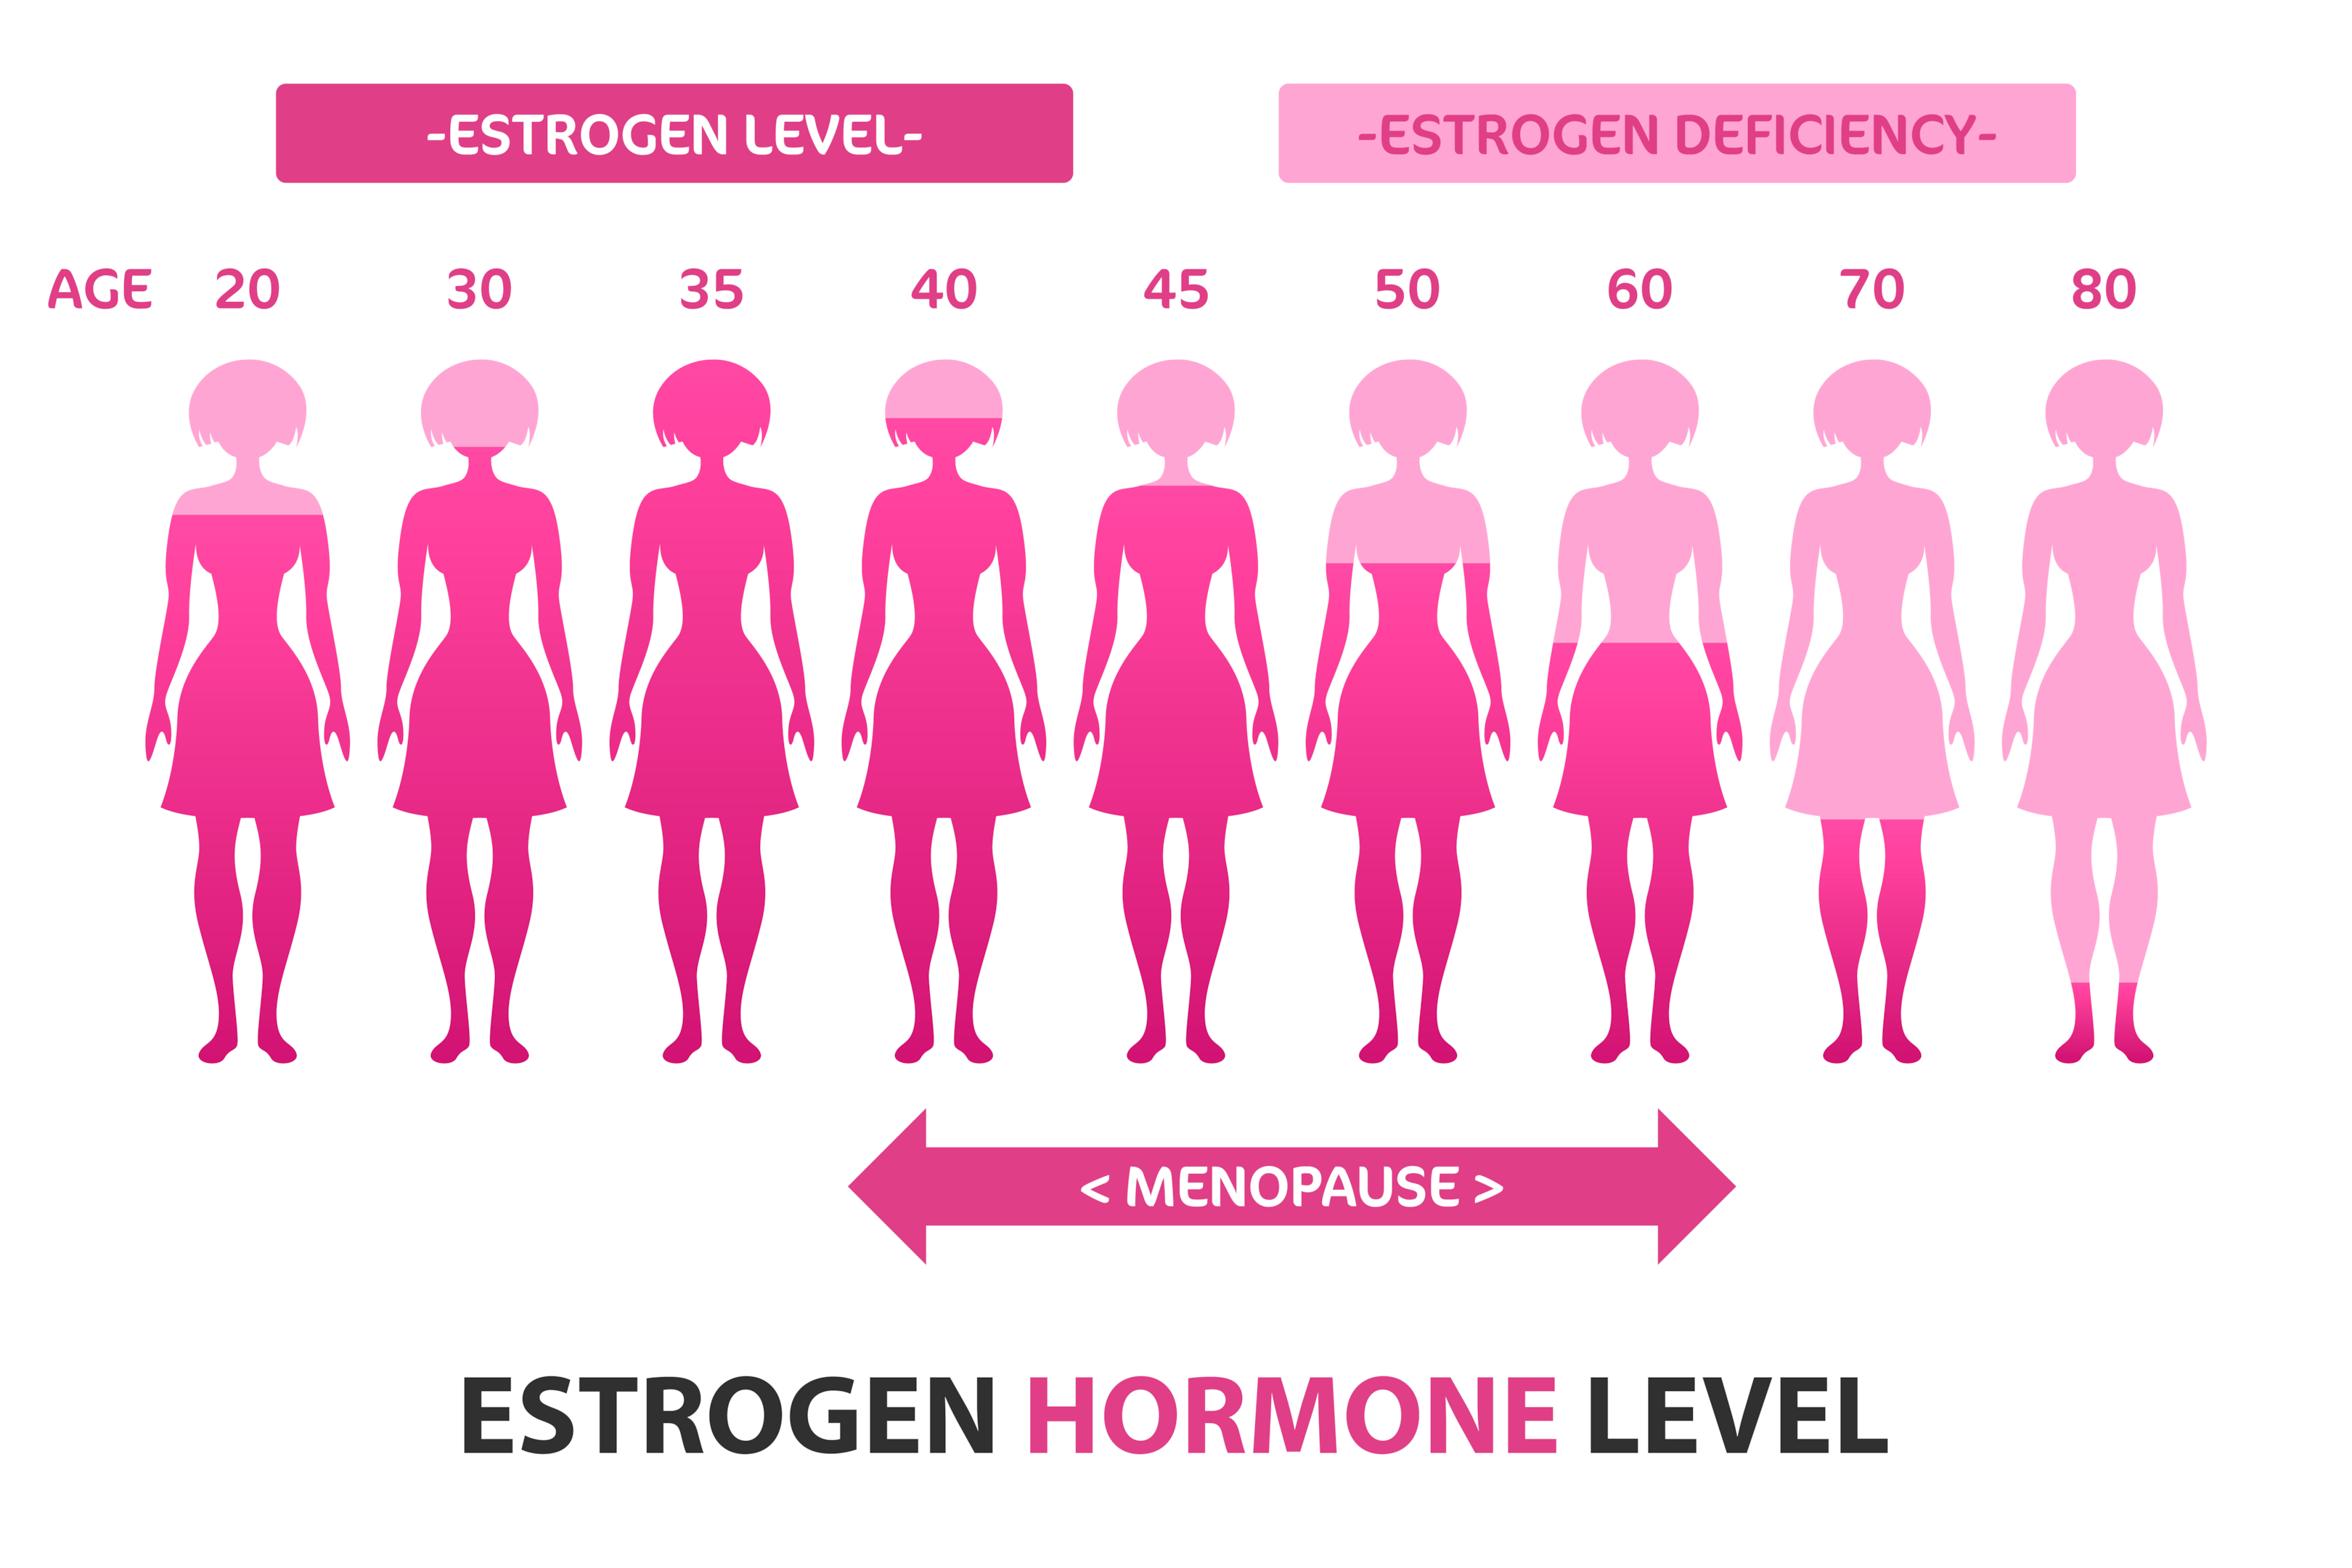 Oestrogen levels fall with age.